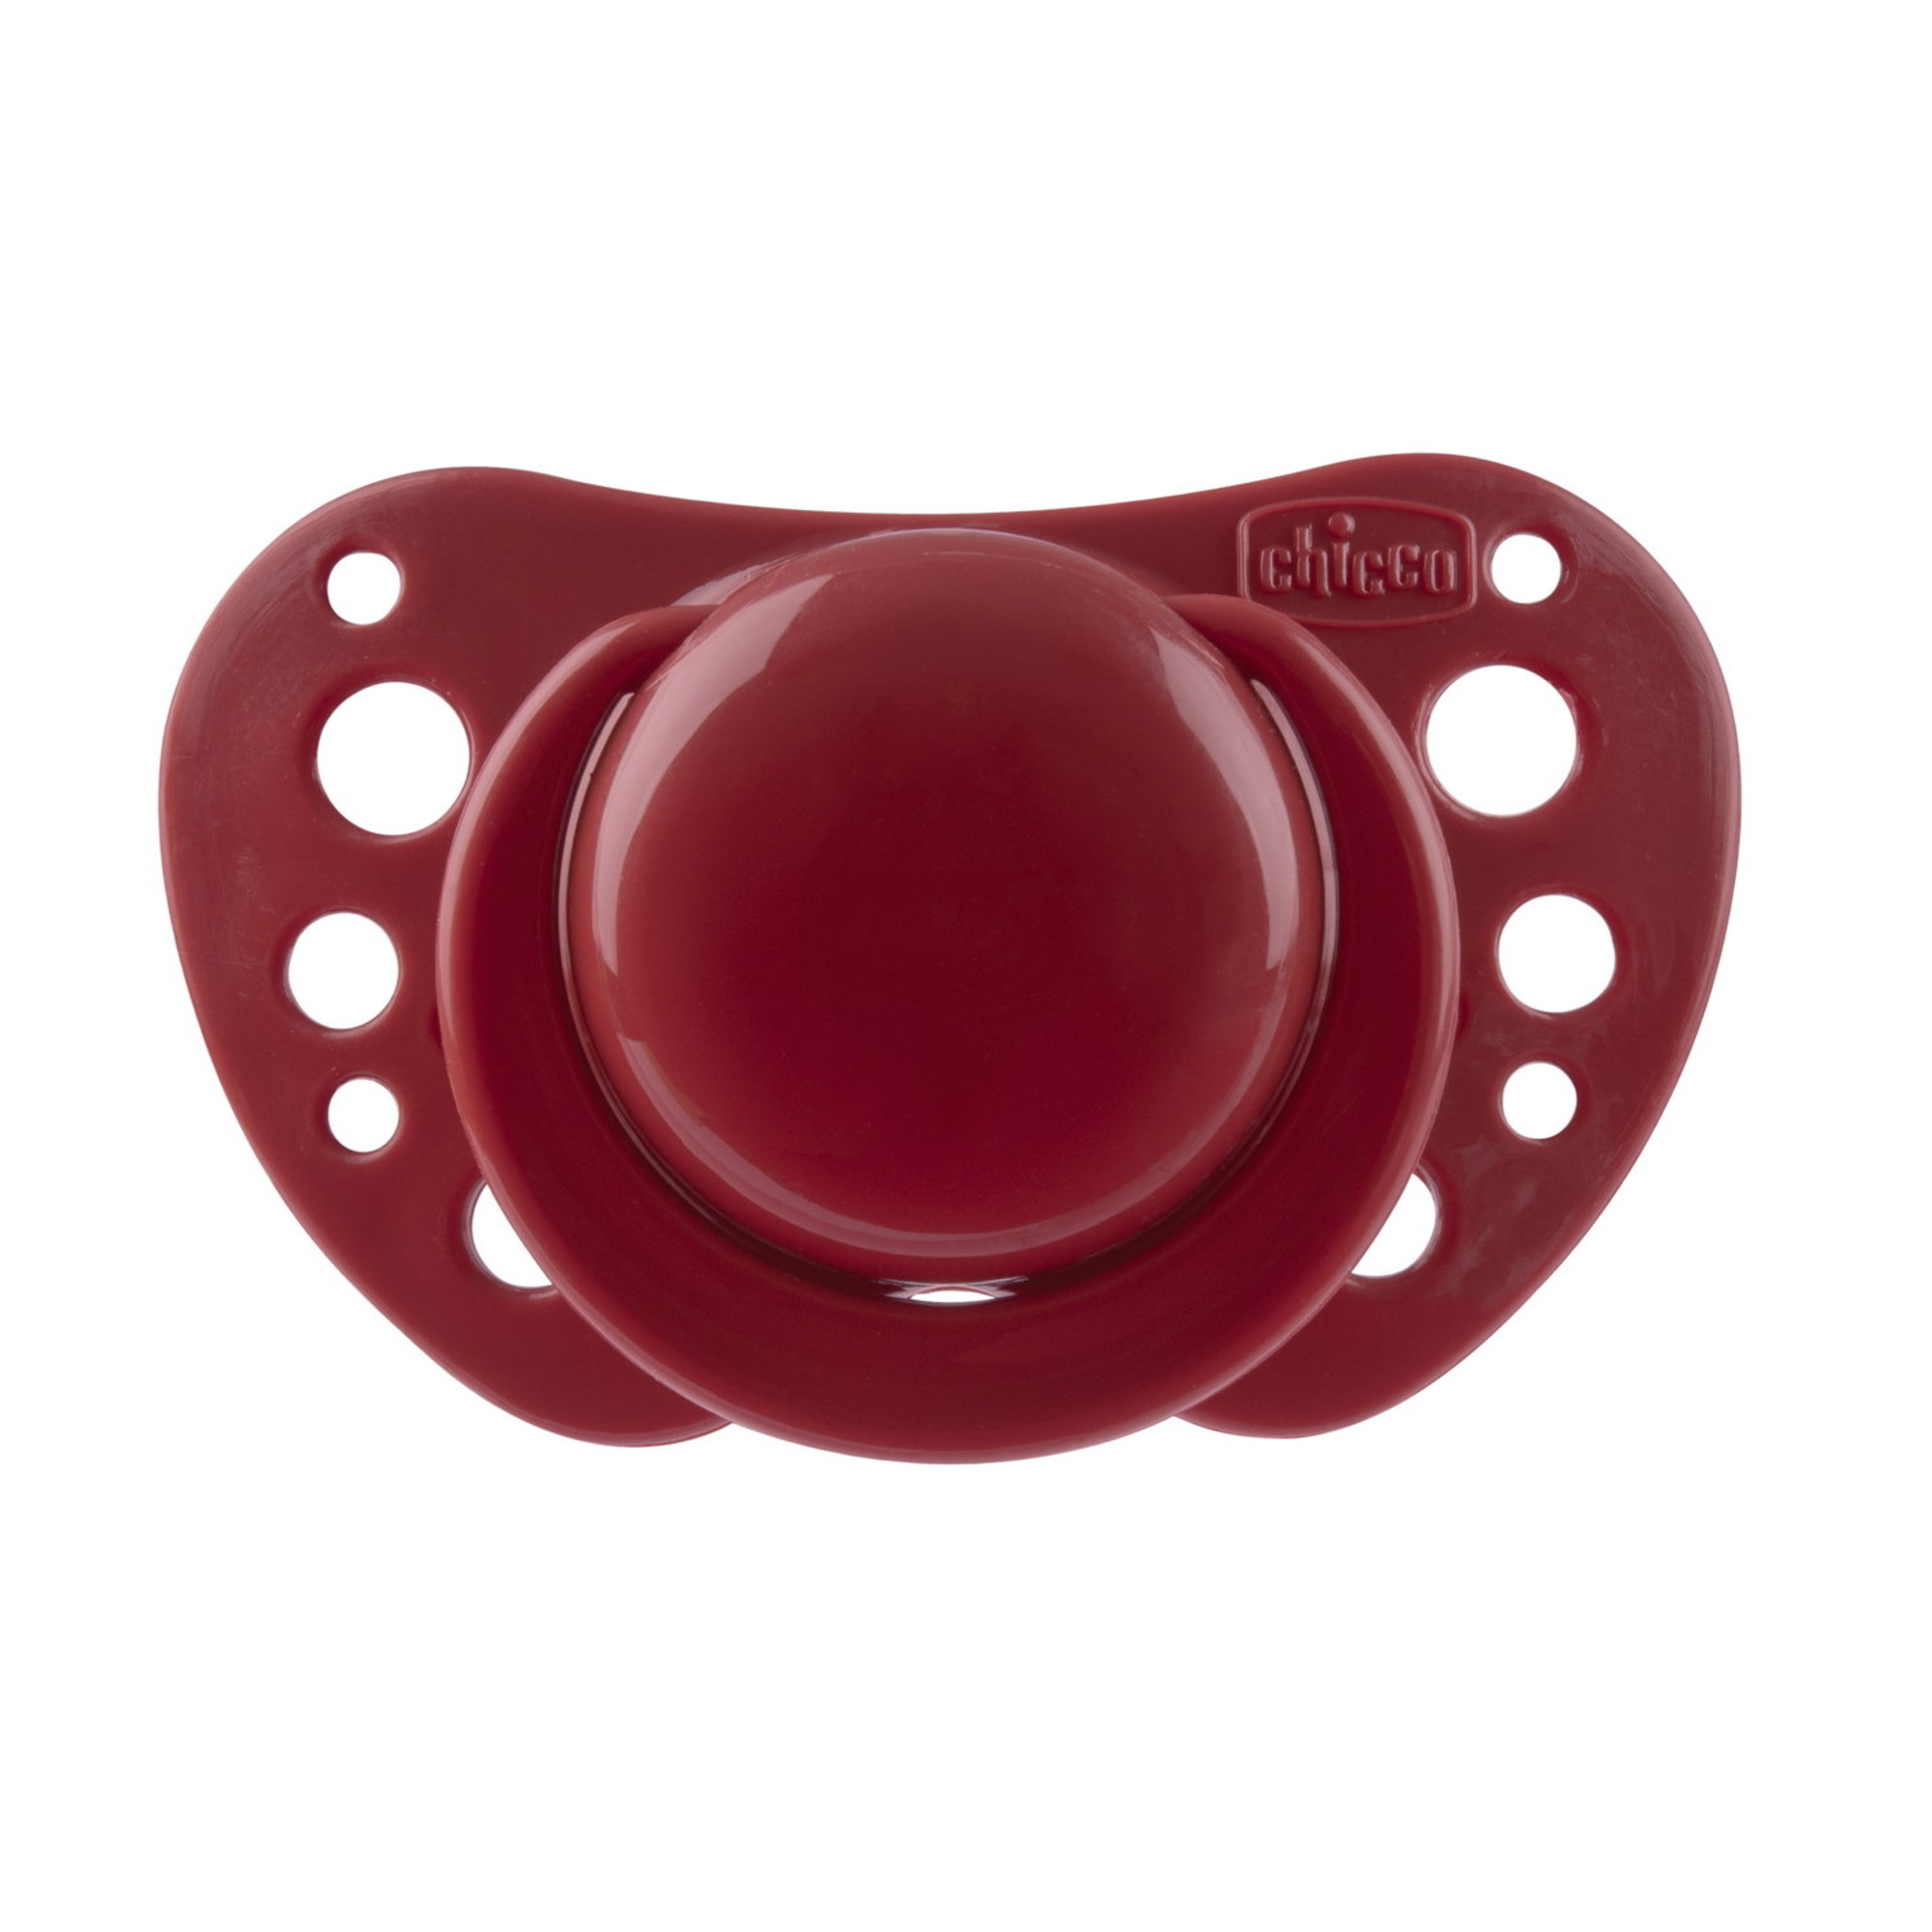 Physioforma air rosso in silicone 6-16 mesi | 2 pezzi | chicco - Chicco